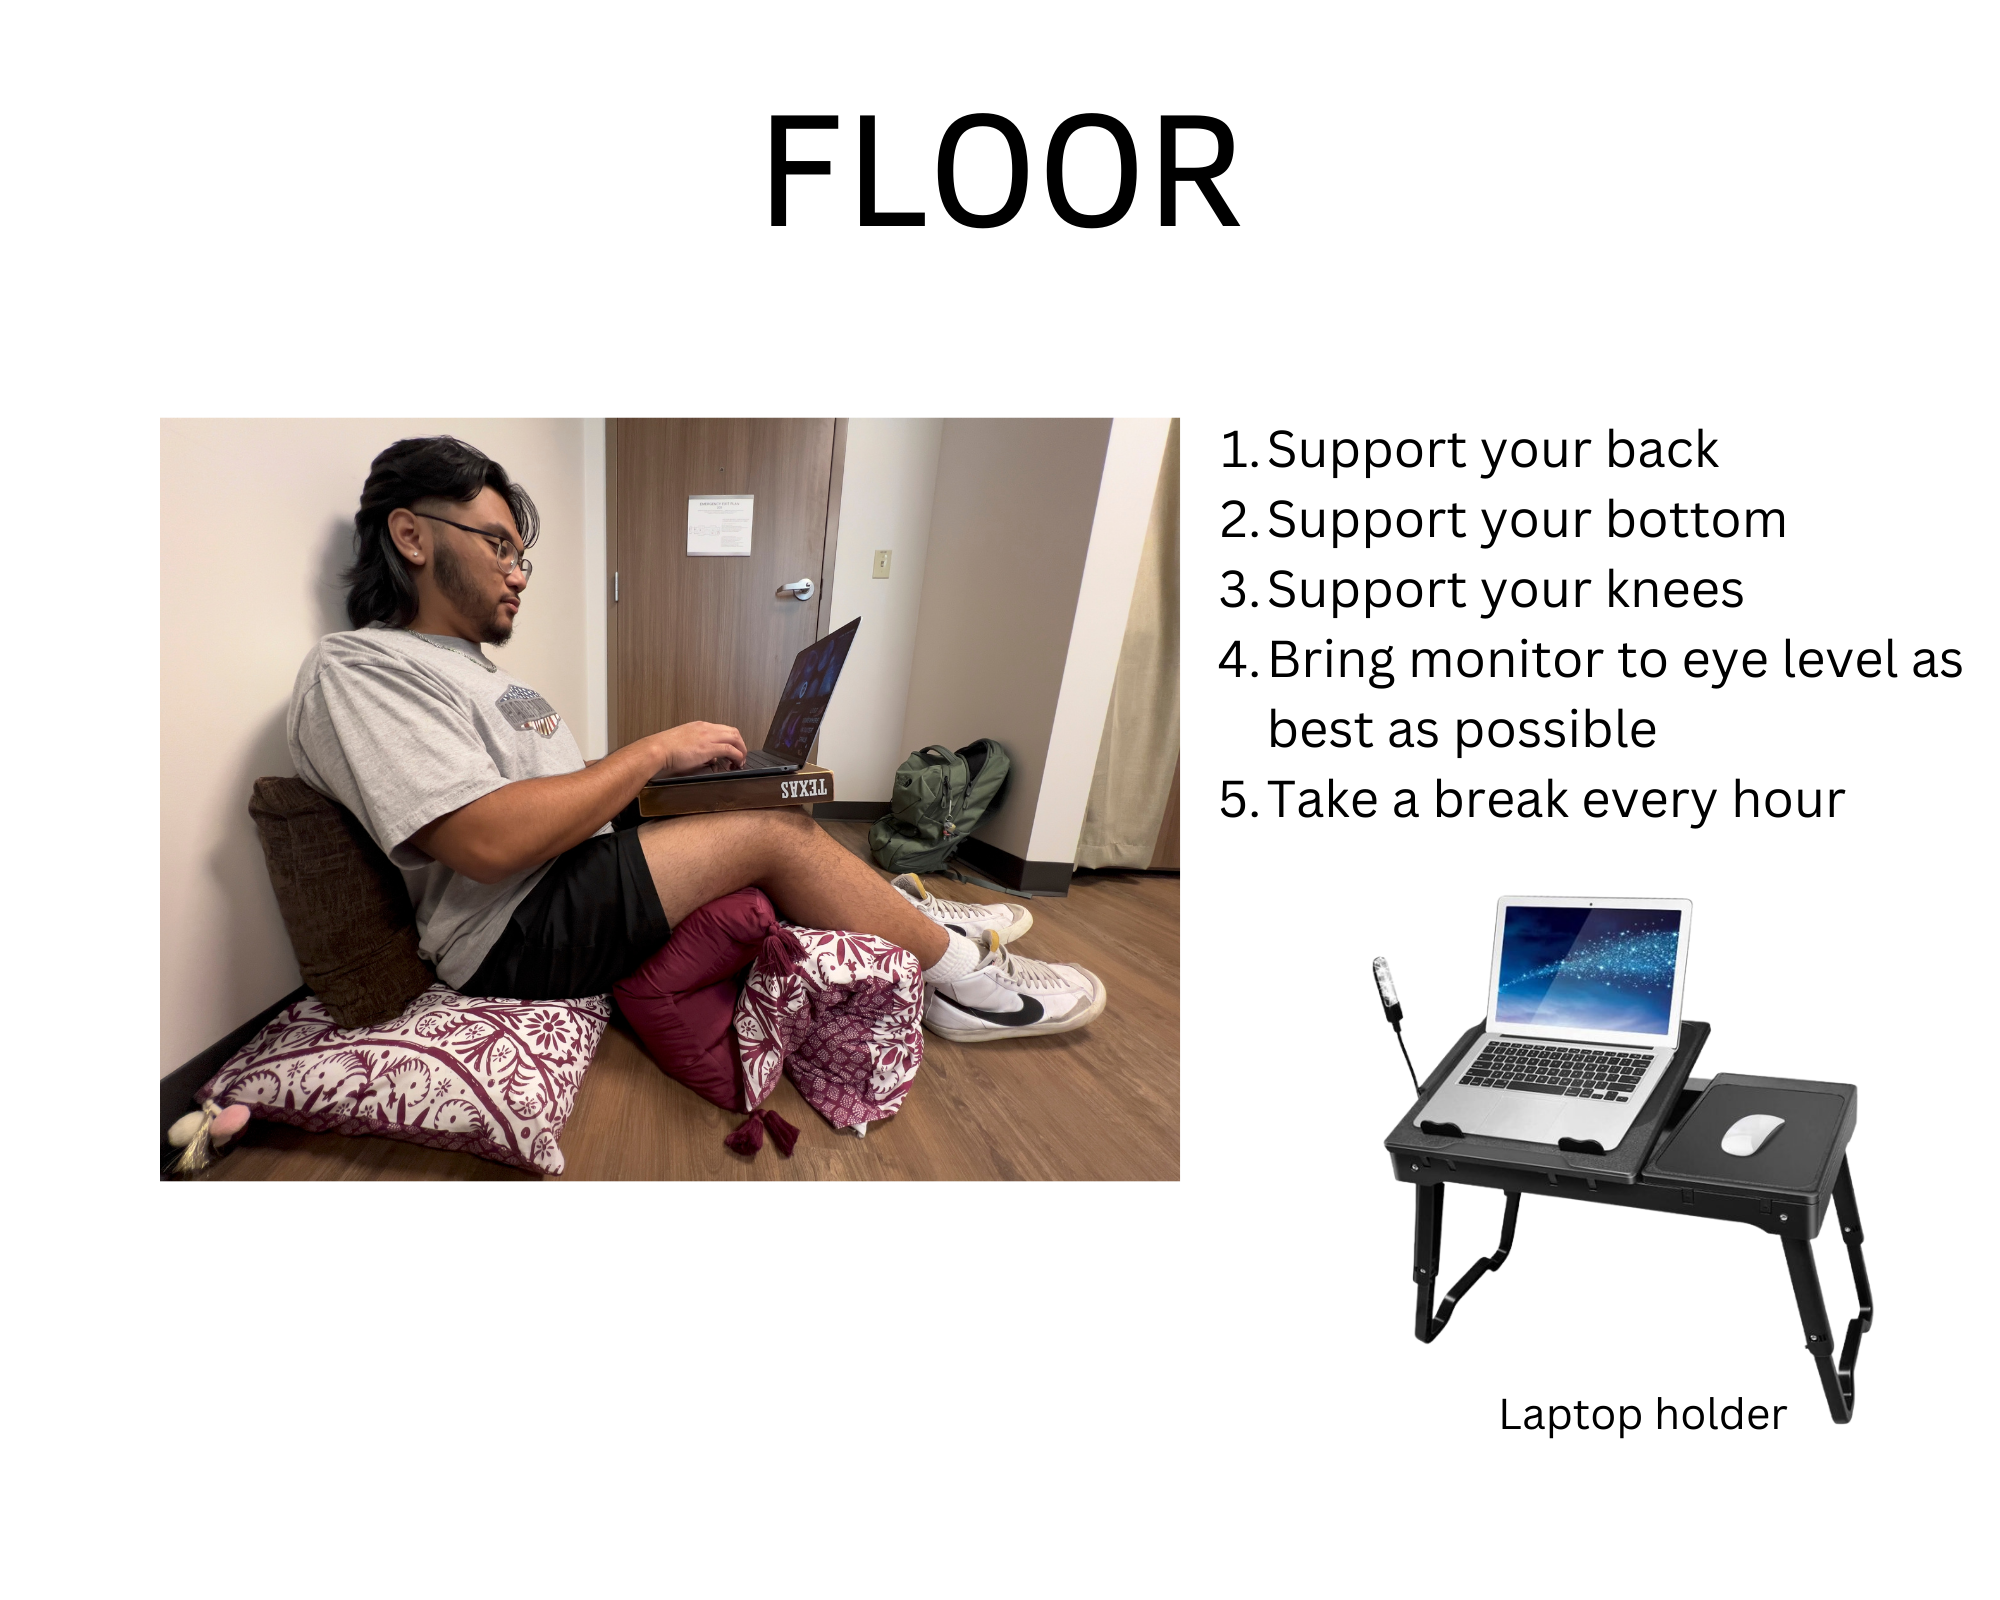 Student sitting on pillows on floor. Black text on white background: "Floor: 1. Support your back 2. Support your bottom 3. Support your knees 4. Bring monitor to eye level as best as possible 5. Take a break every hour". A laptop holder is featured as product.